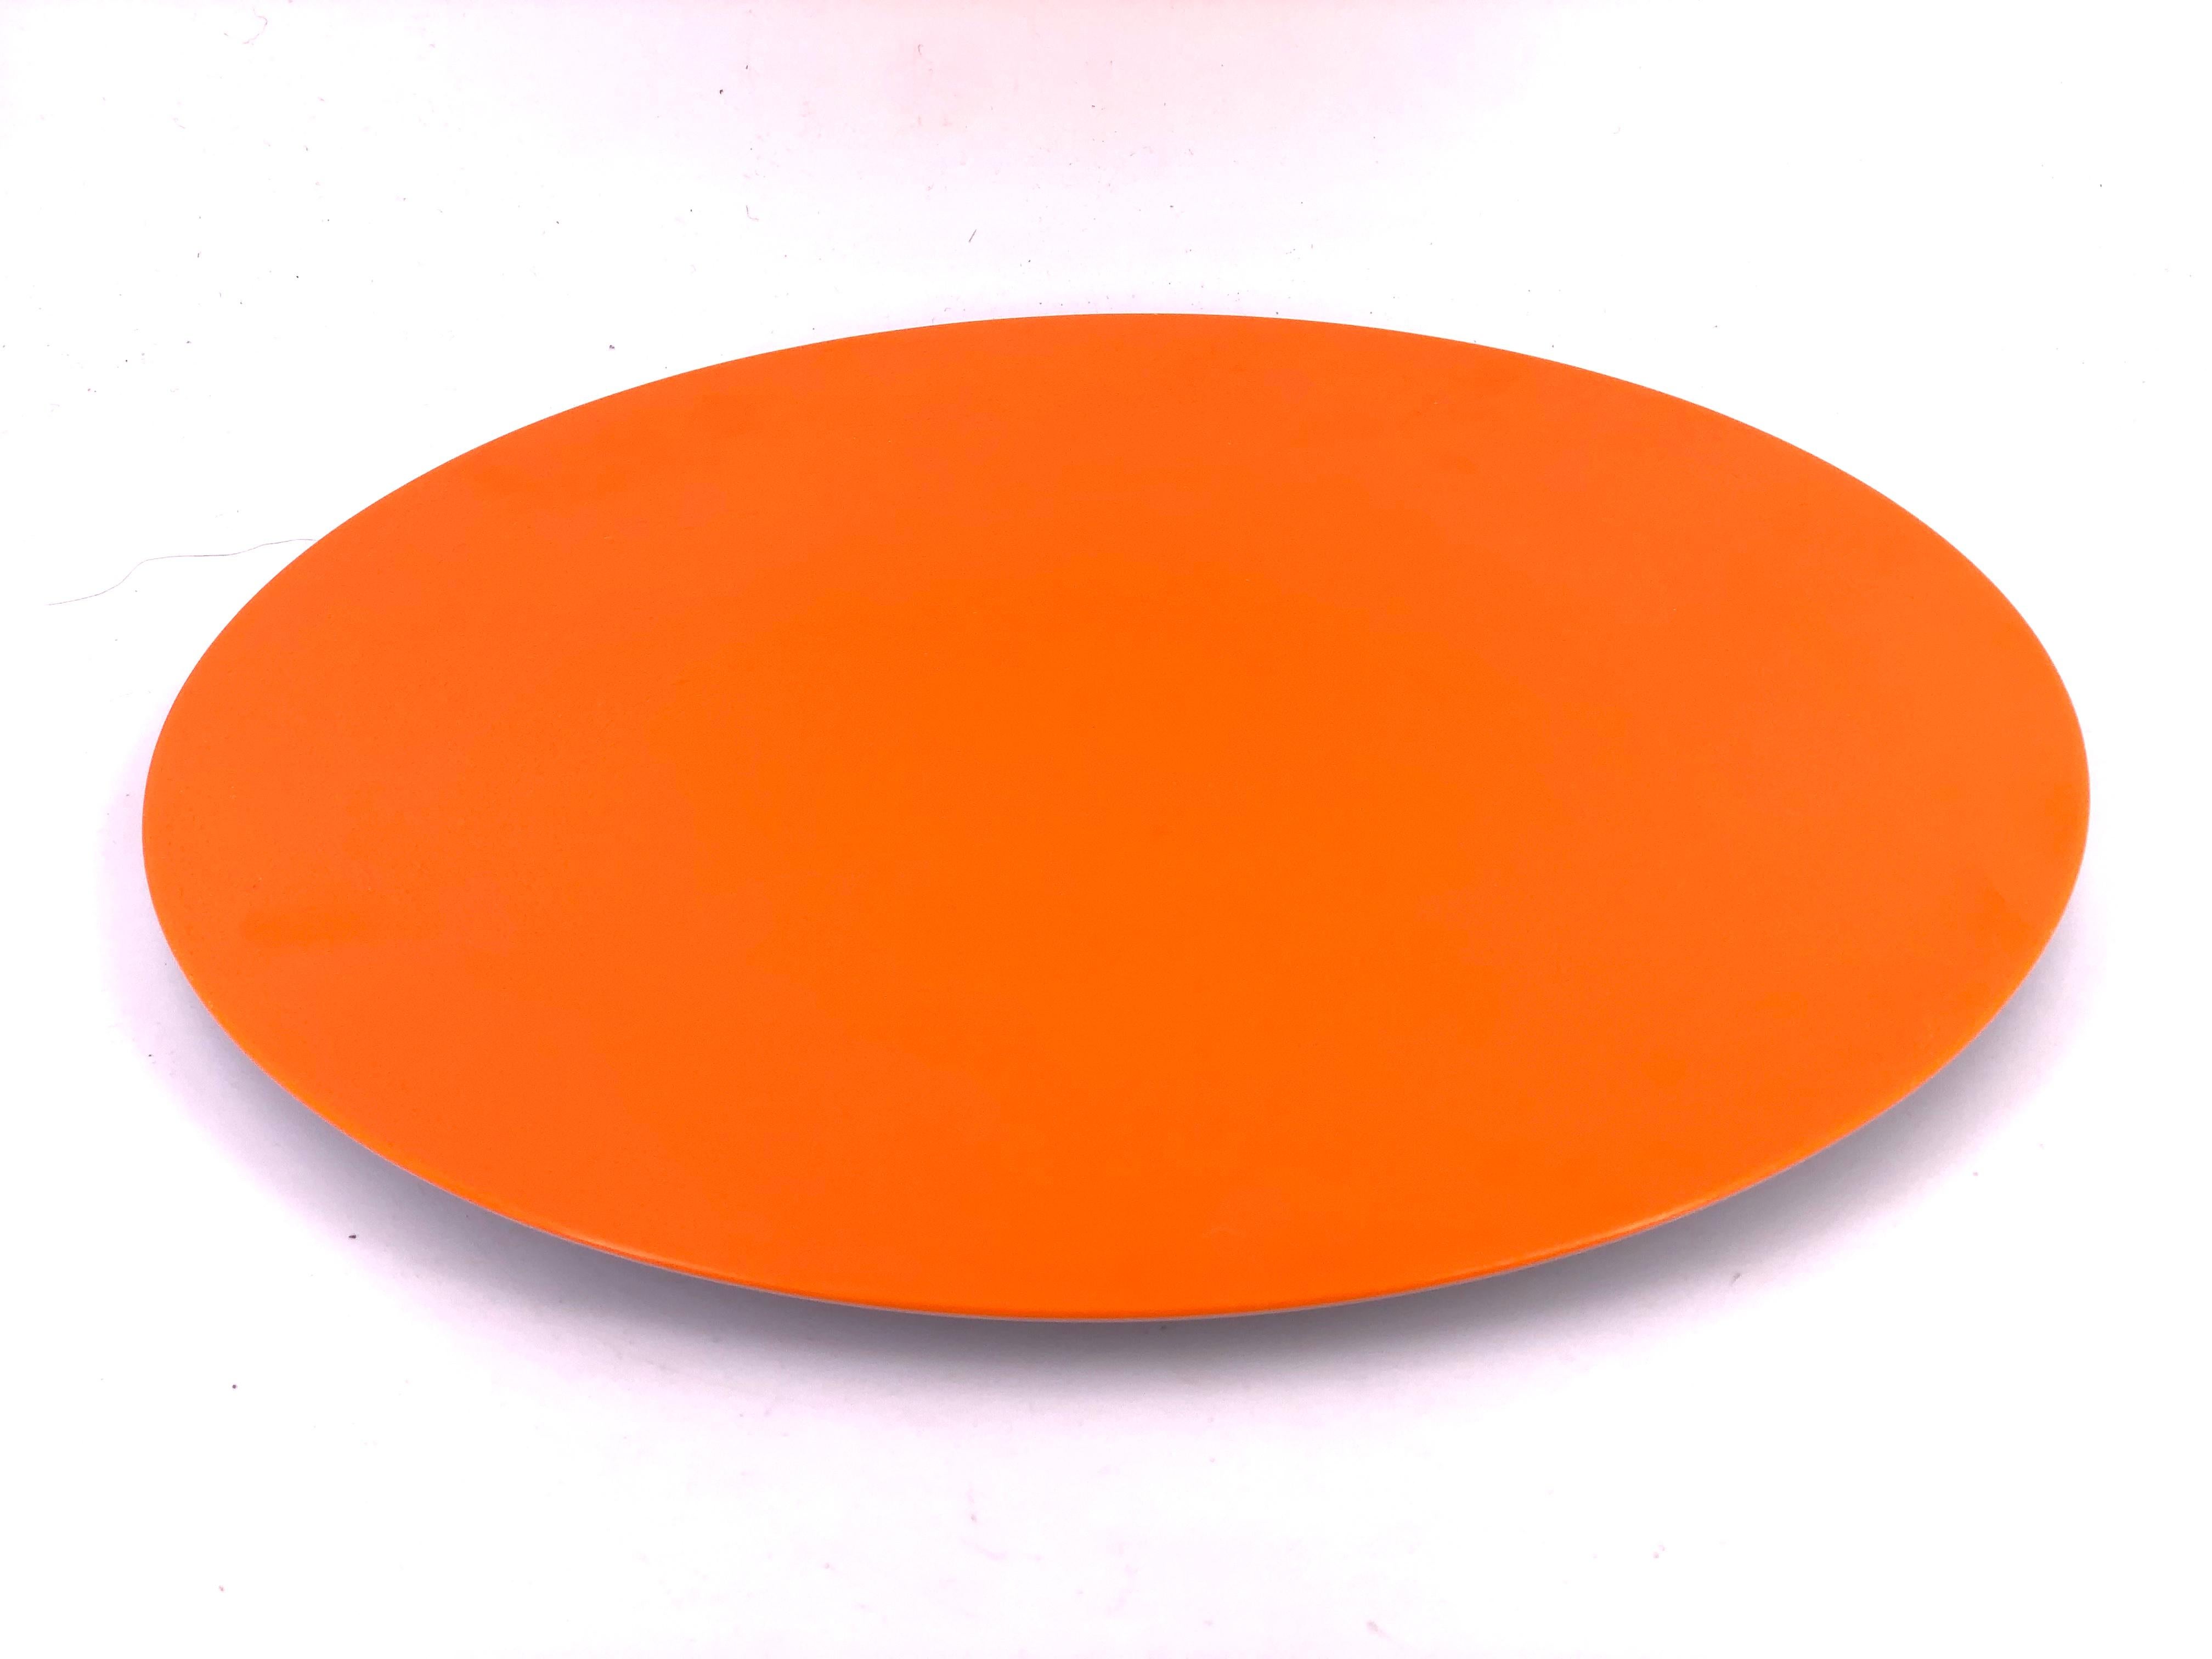 A cool large orange centerpiece orange large plate, circa 1970s in nice orange melamine great centerpiece we have 2 available buyers has the choice to buy 1 or 2.